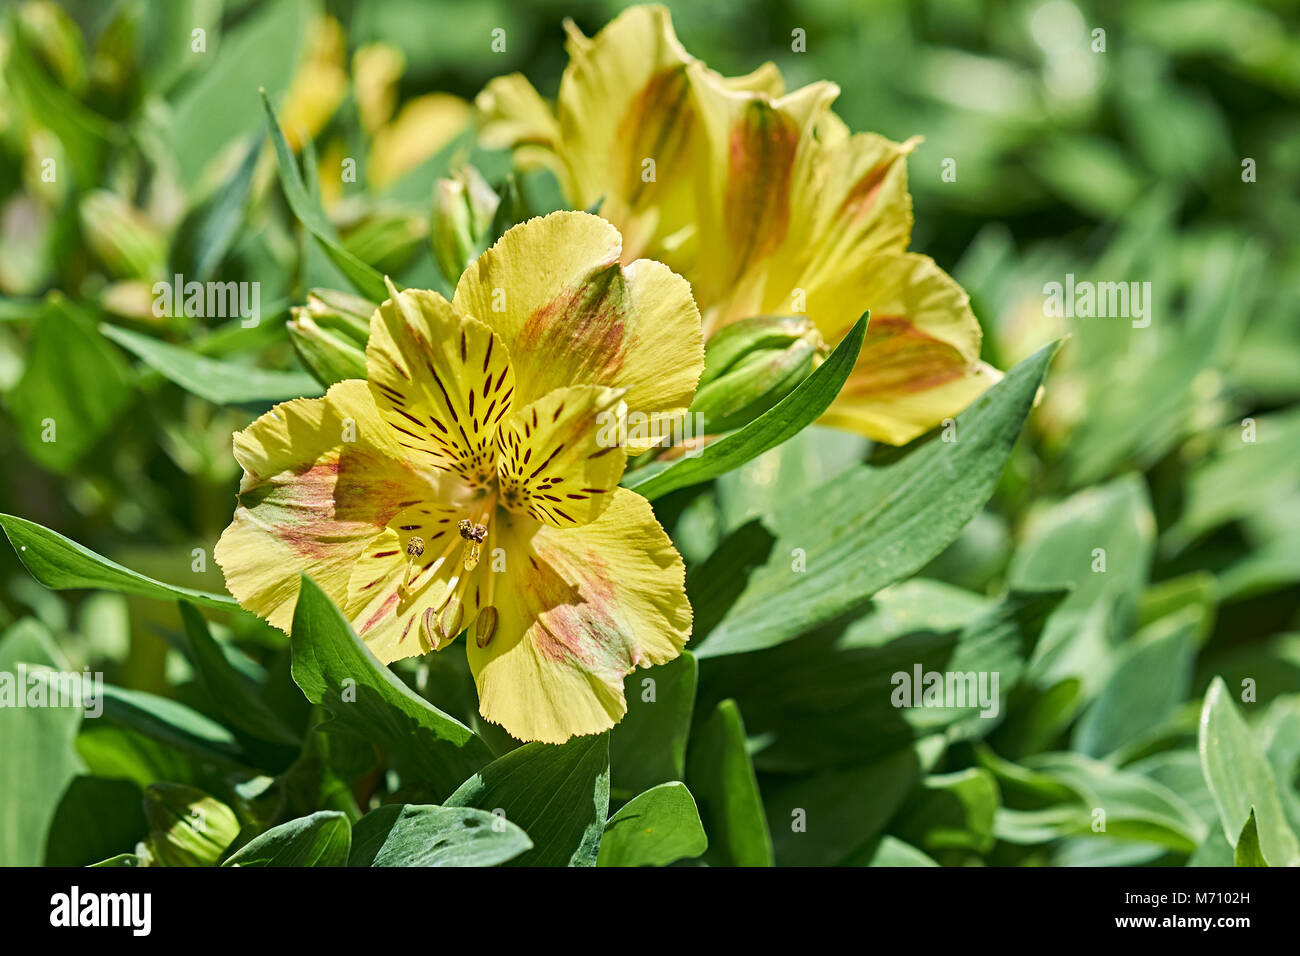 Rhododendron luteum or yellow azalea flower blossoms in full bloom. Stock Photo